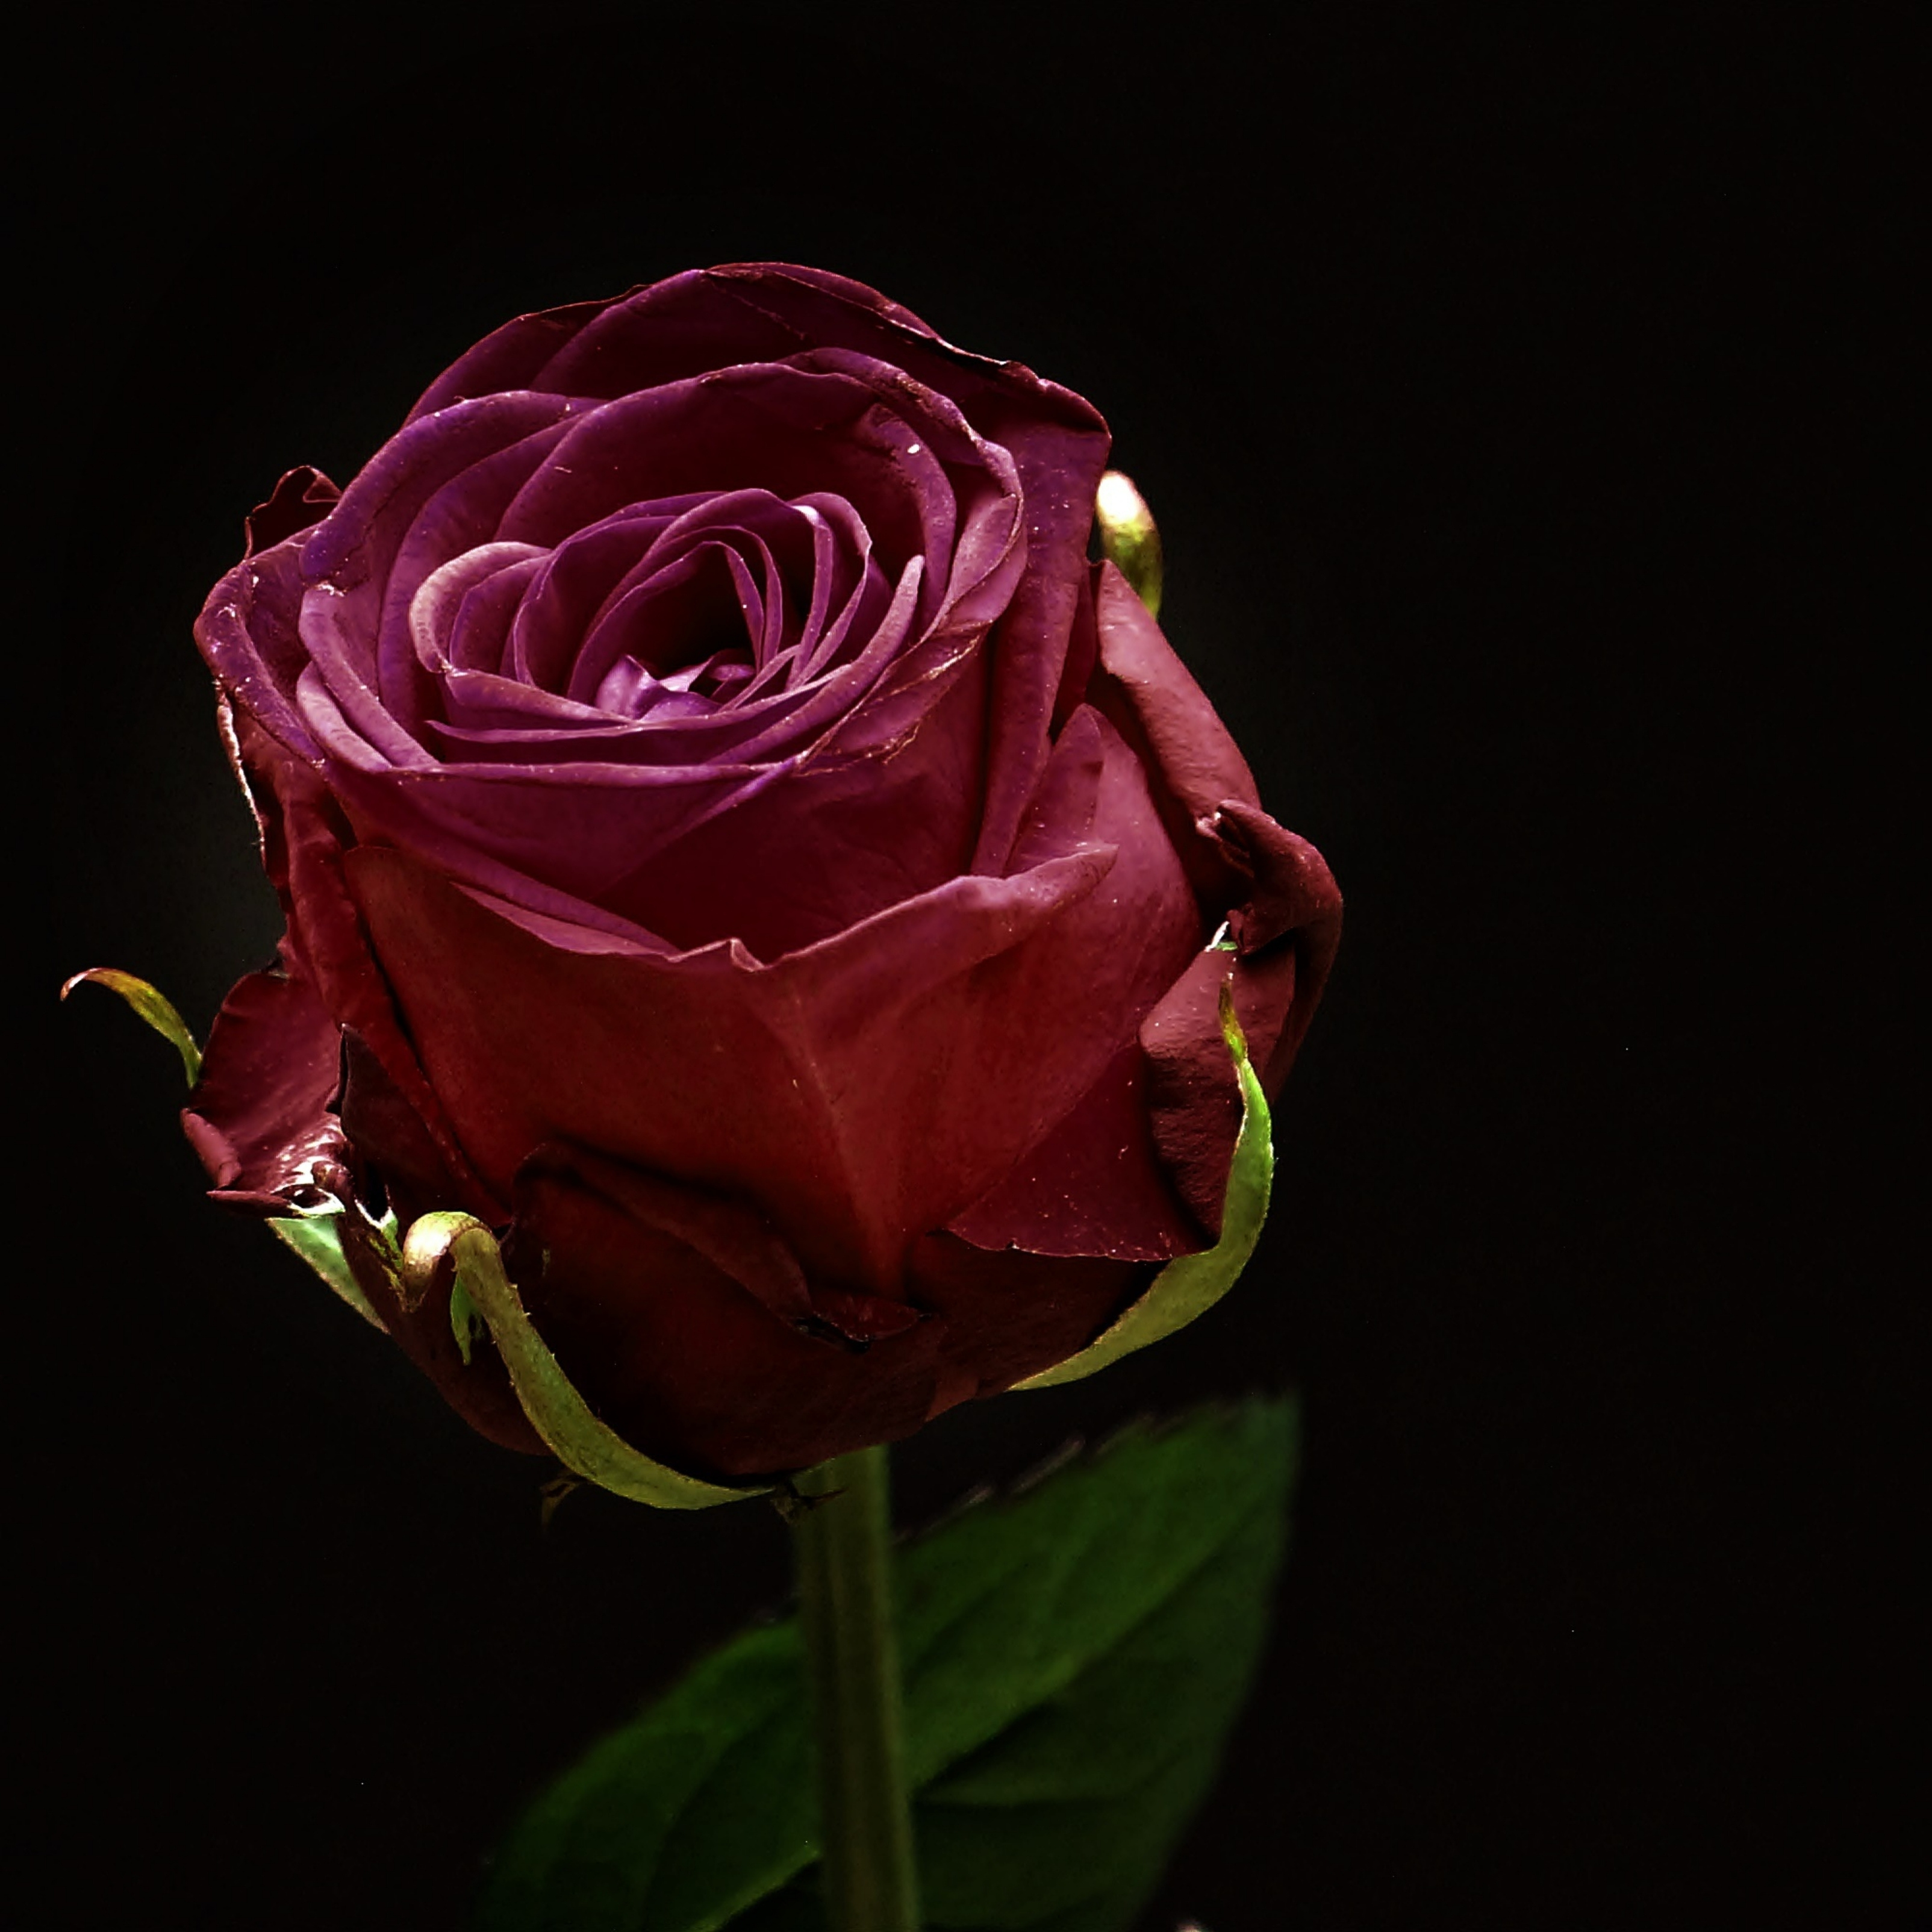 iPad Wallpapers Red Rose Flower in the Dark Black Background iPad Wallpaper 3208x3208 px